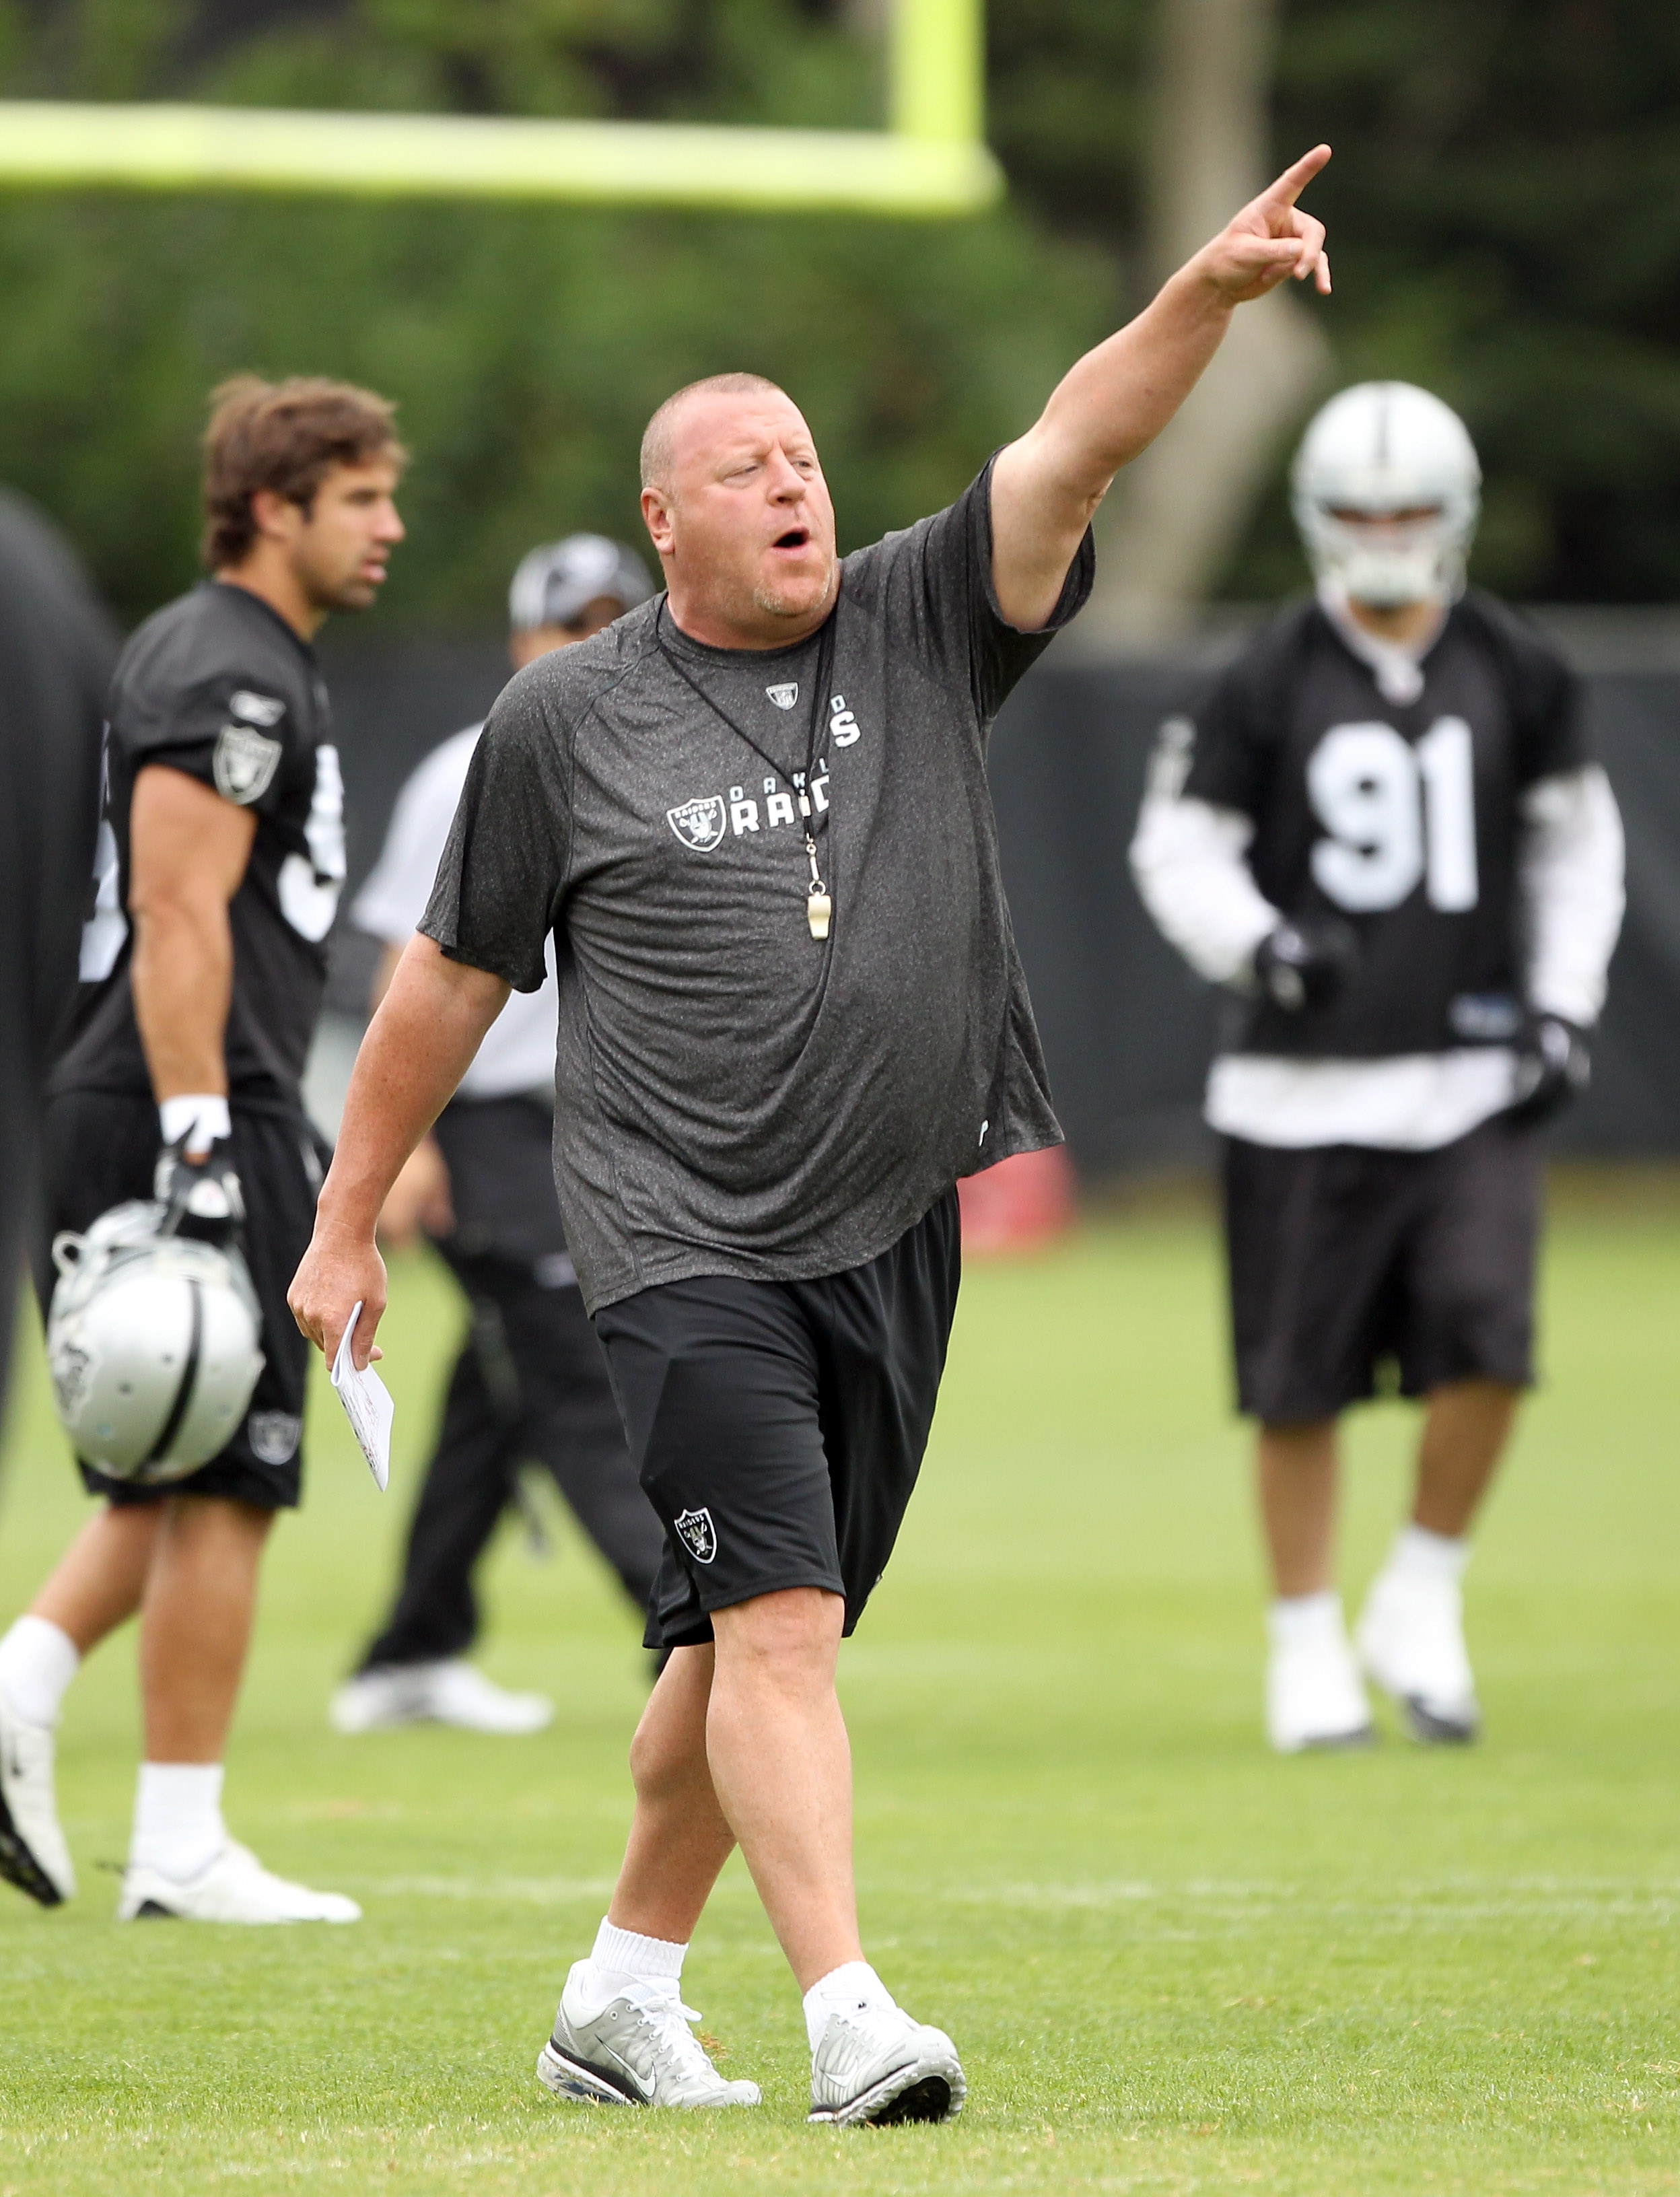 NAPA, CA - AUGUST 01:  Head coach Tom Cable of the Oakland Raiders shouts to his team during the Raiders training camp at their Napa Valley Training Complex on August 1, 2010 in Napa, California.  (Photo by Ezra Shaw/Getty Images)